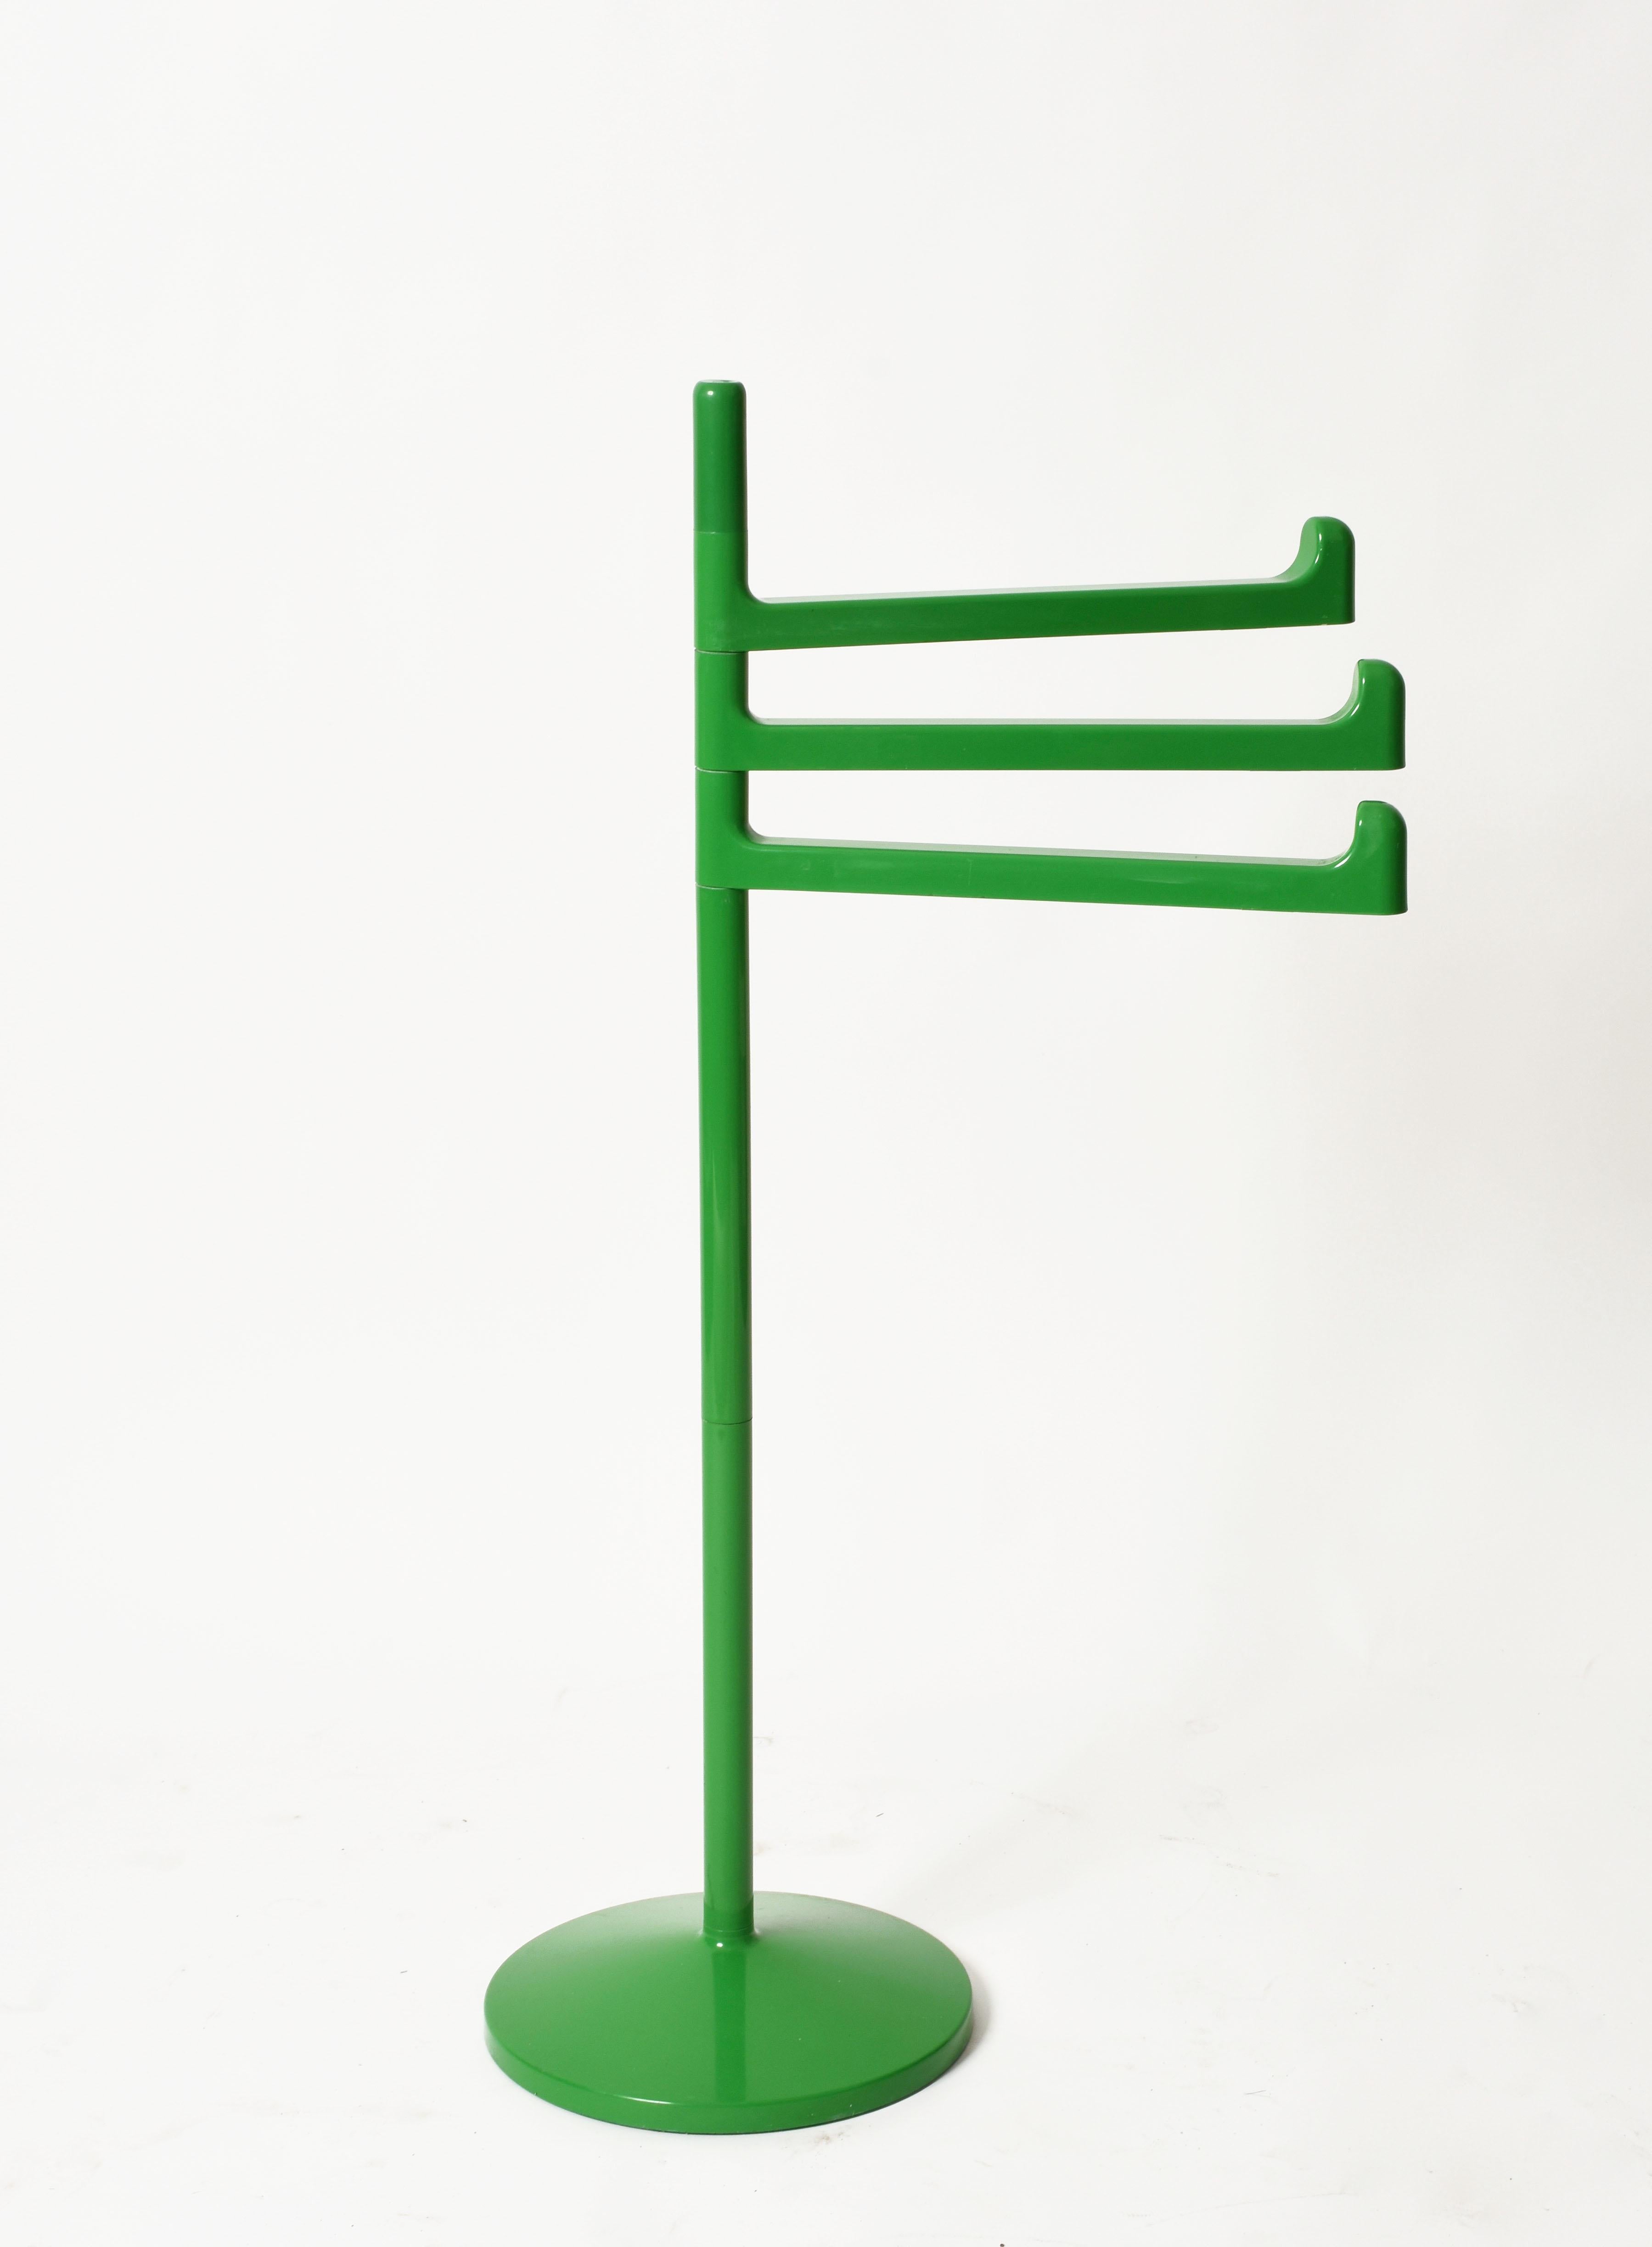 Magnificent midcentury green steel sculptural towel rack. This marvellous item was designed by Makio Hasuike, a Japanese designer with a studio in Italy since the mid-1970s.

This towel holder was designed in 1977. It is modern, minimalistic,